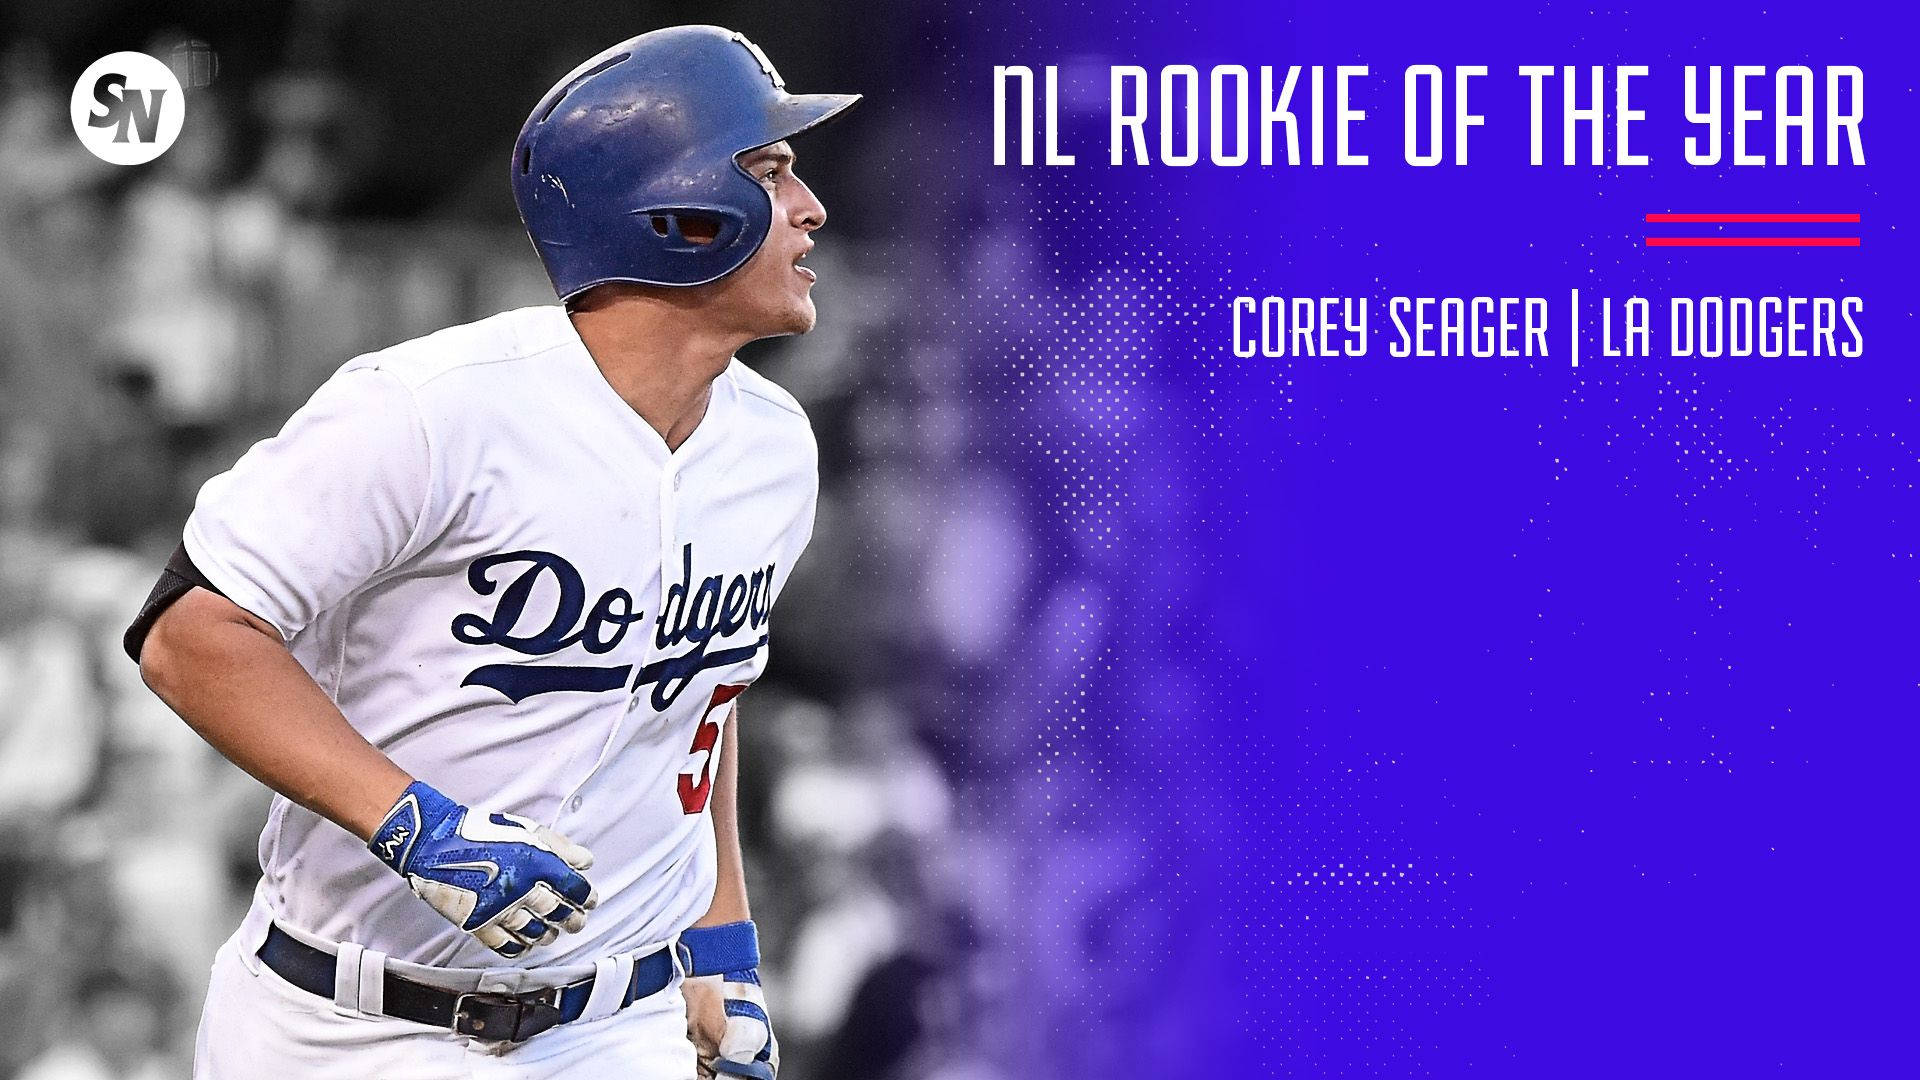 Corey Seager Nl Rookie Of The Year Background